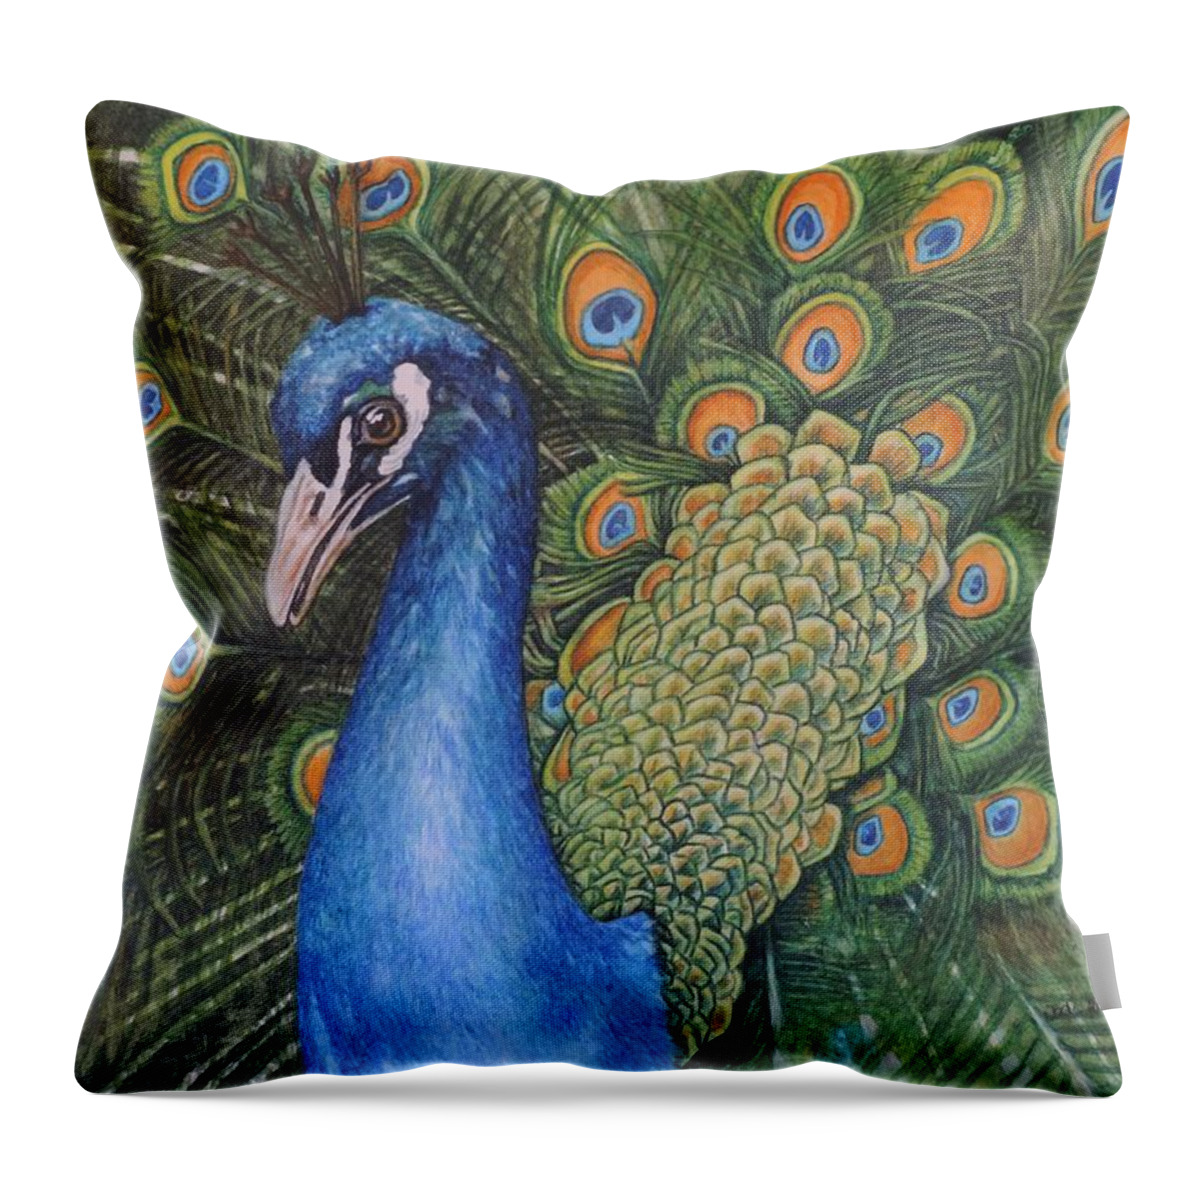 Peacock Throw Pillow featuring the painting Pretty as a Peacock by Jodi Higgins